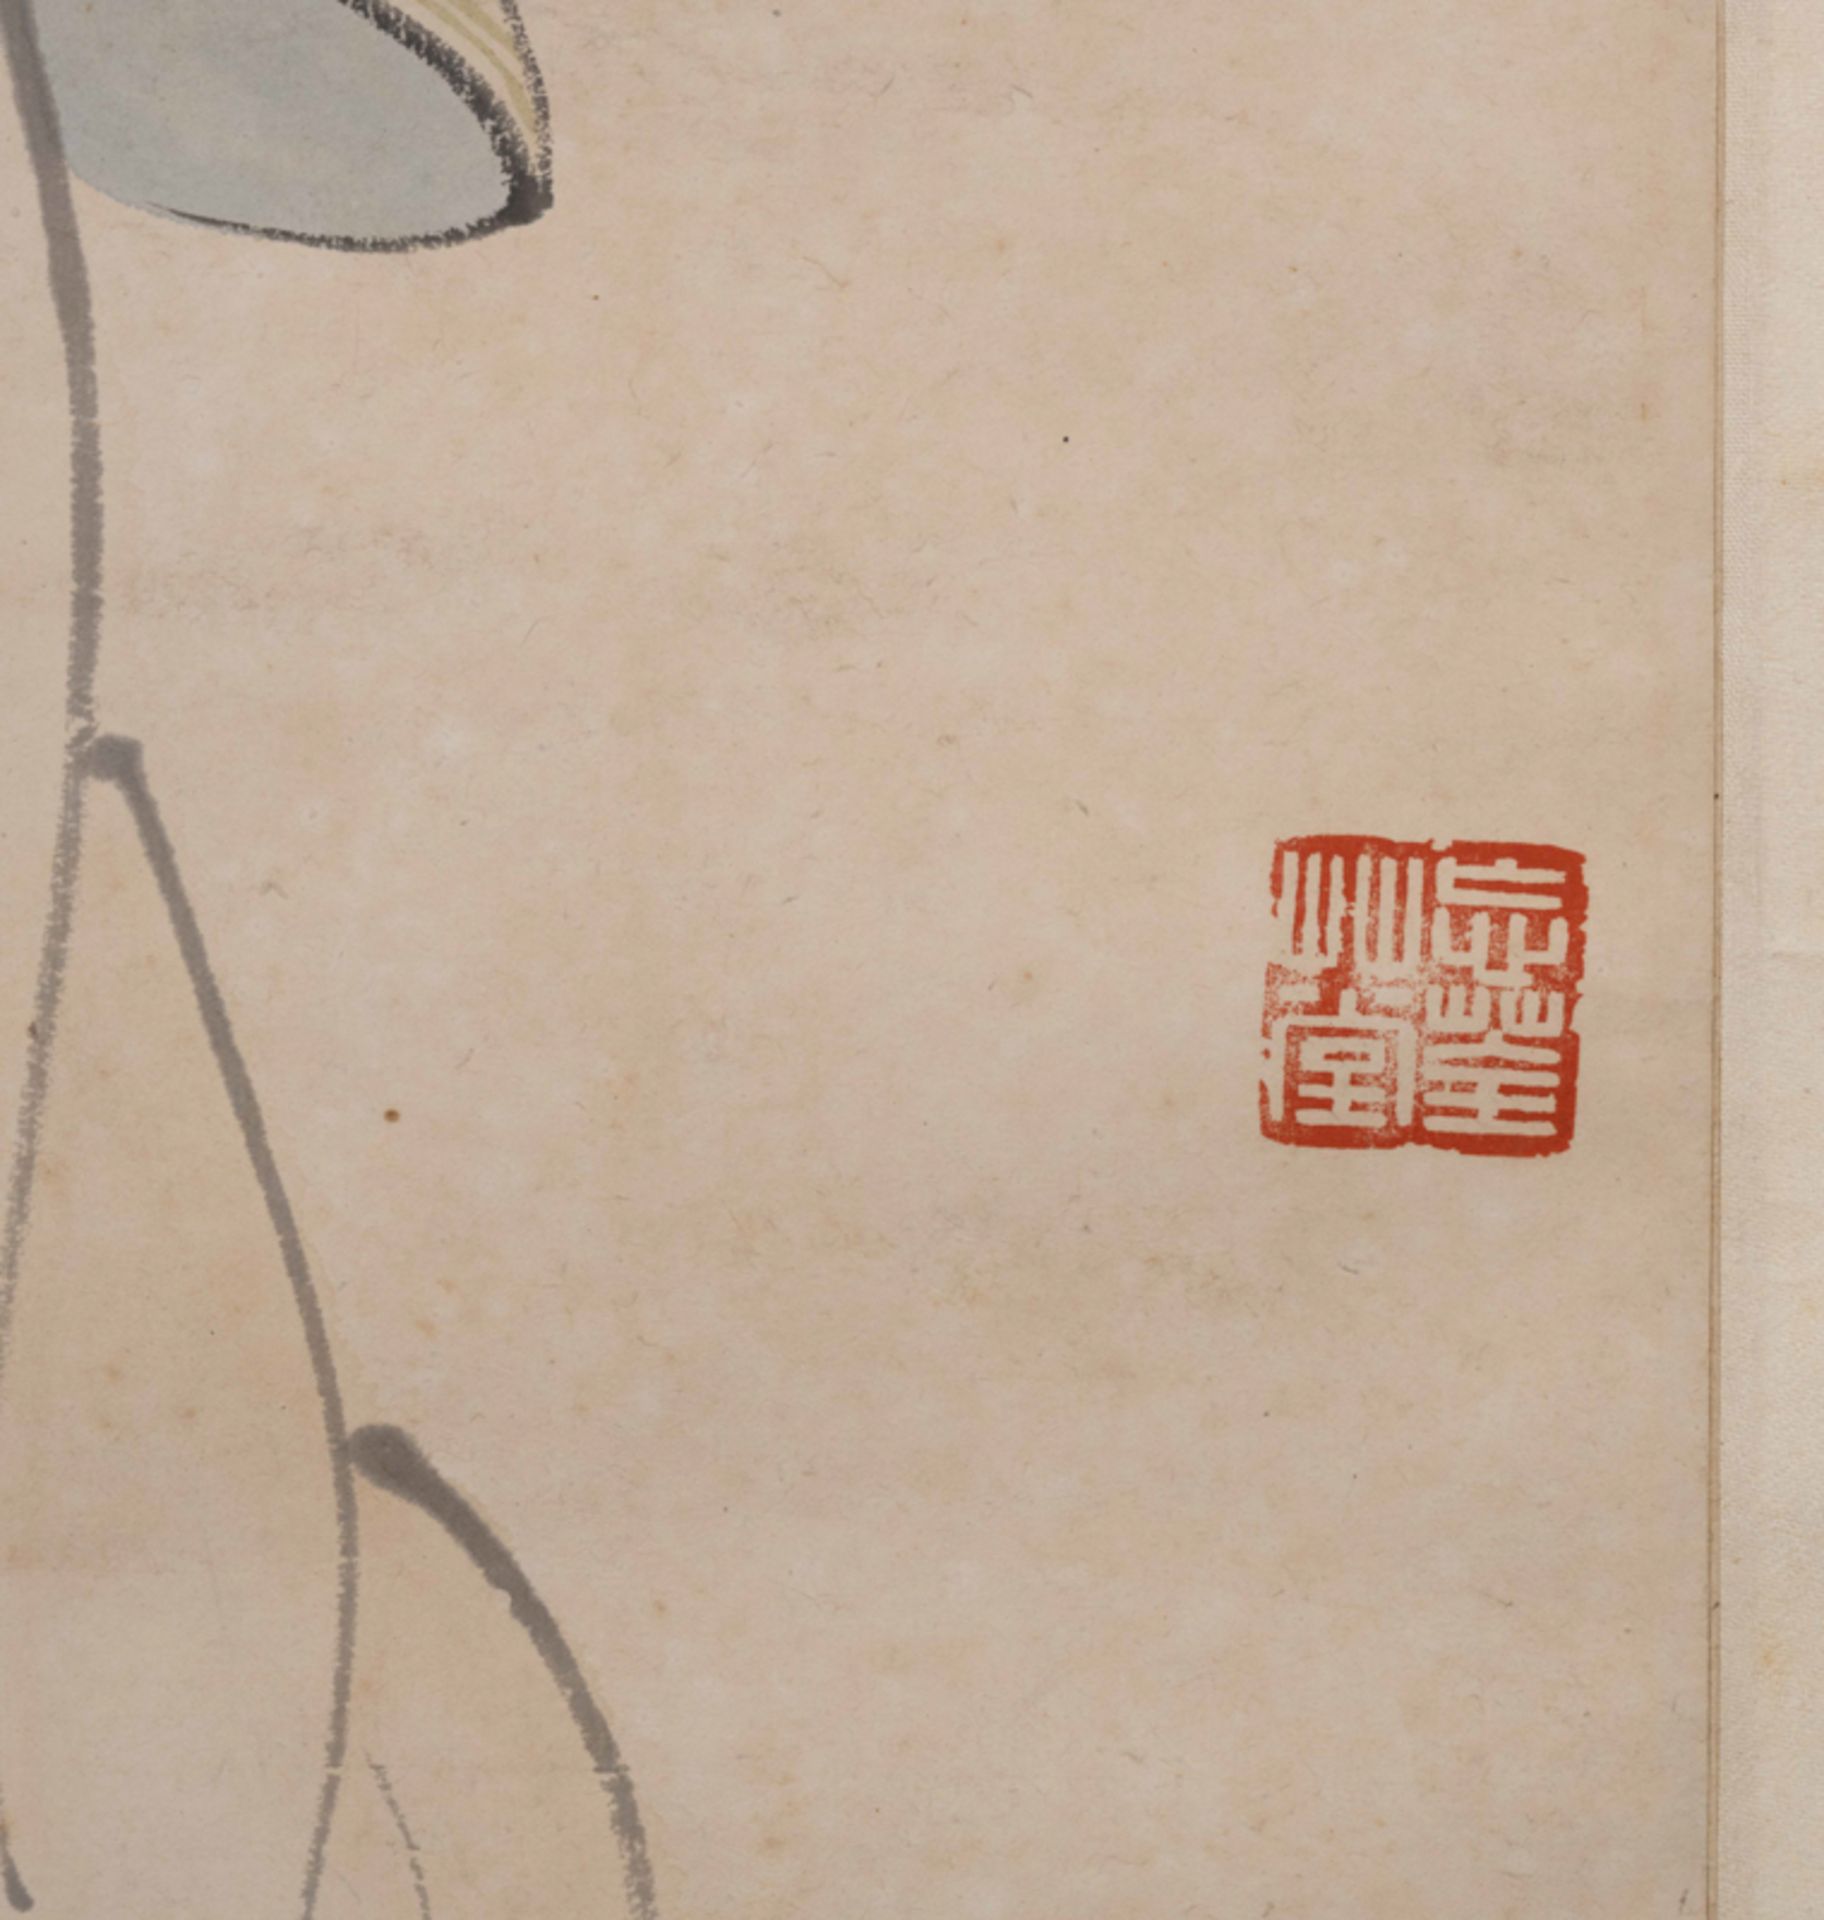 PAN ZHENYONG (1852-1921), PAINTING OF A LADY 潘振鏞 美人圖 - Image 5 of 10